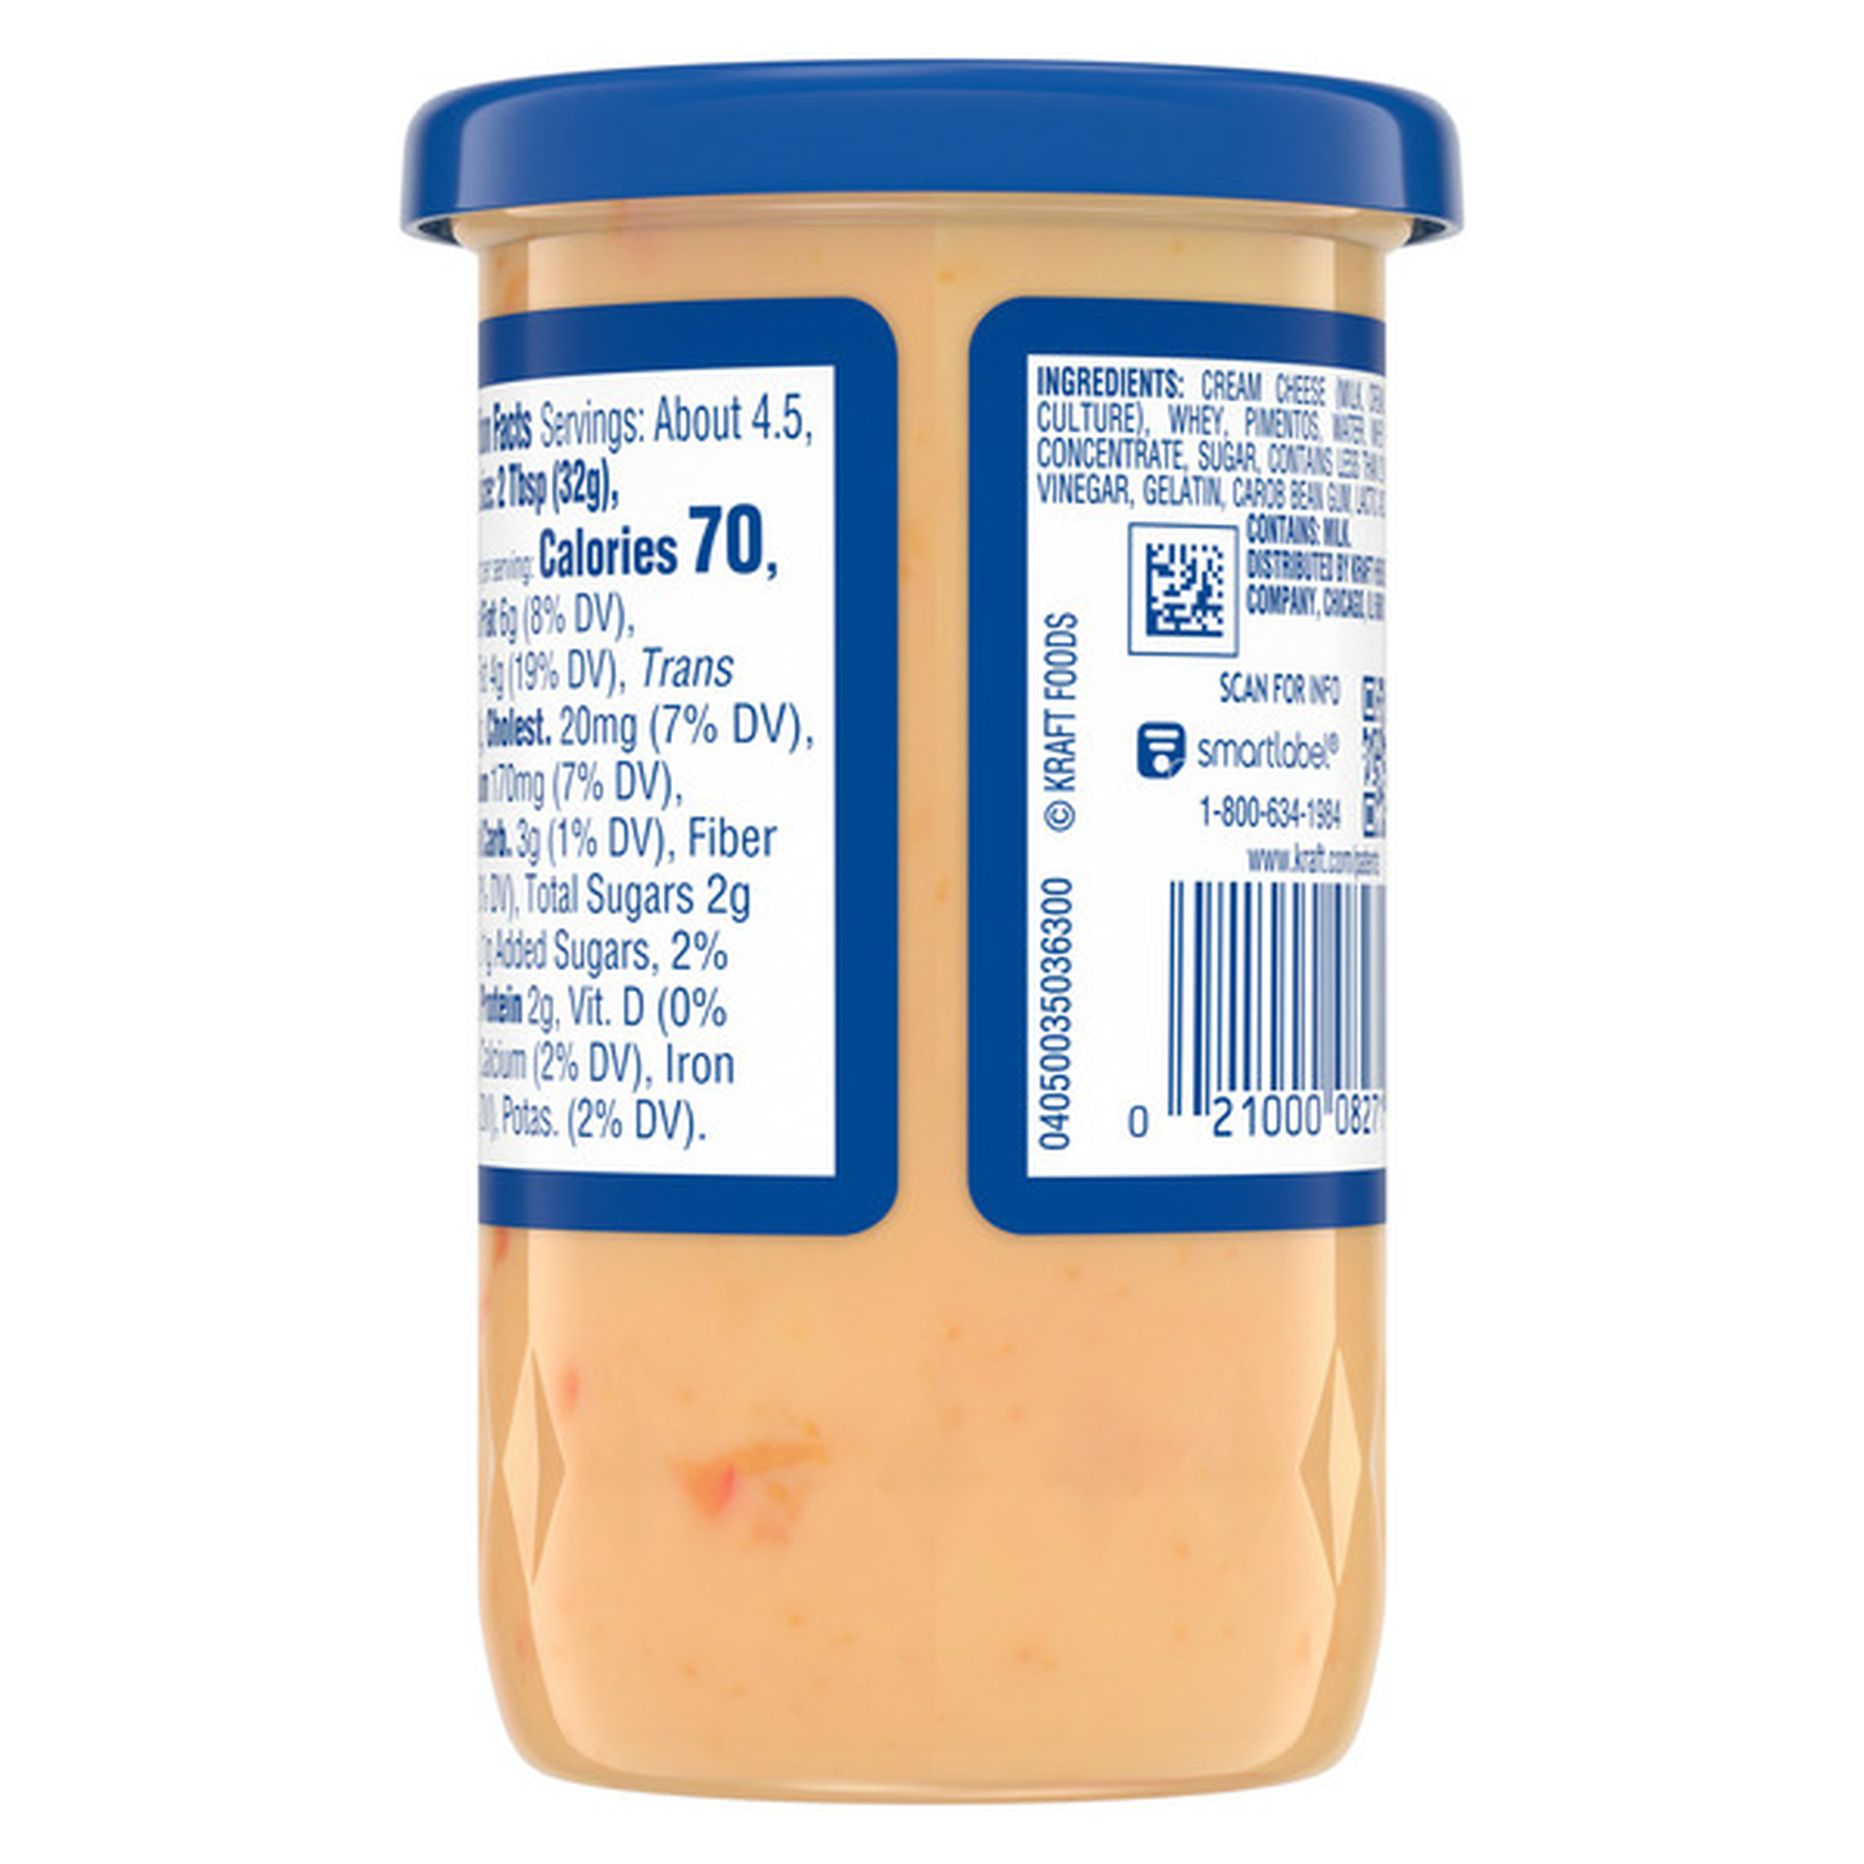 Kraft Pimento Cheese Spread (5 oz) Delivery or Pickup Near Me Instacart